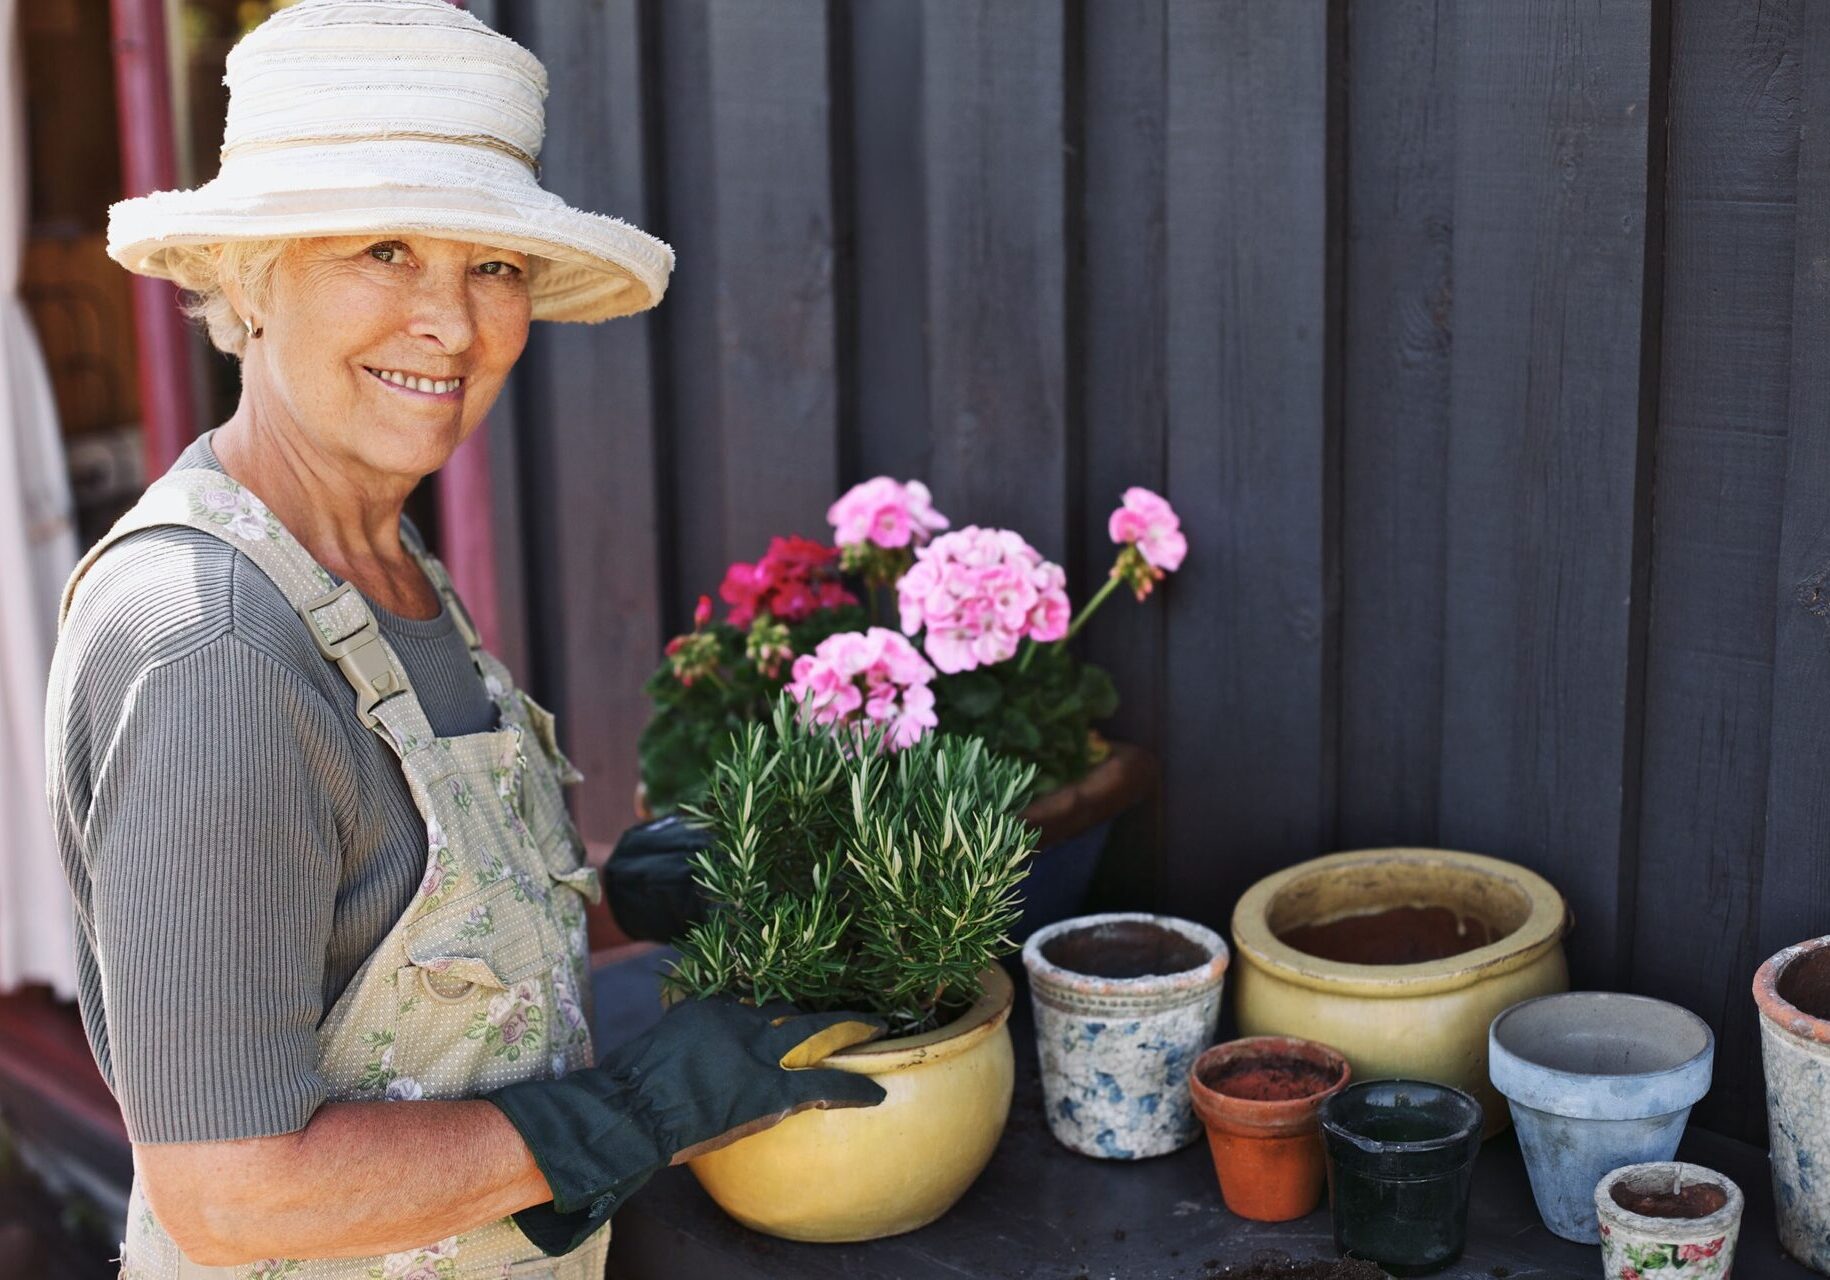 A woman in an apron and hat is holding flowers.